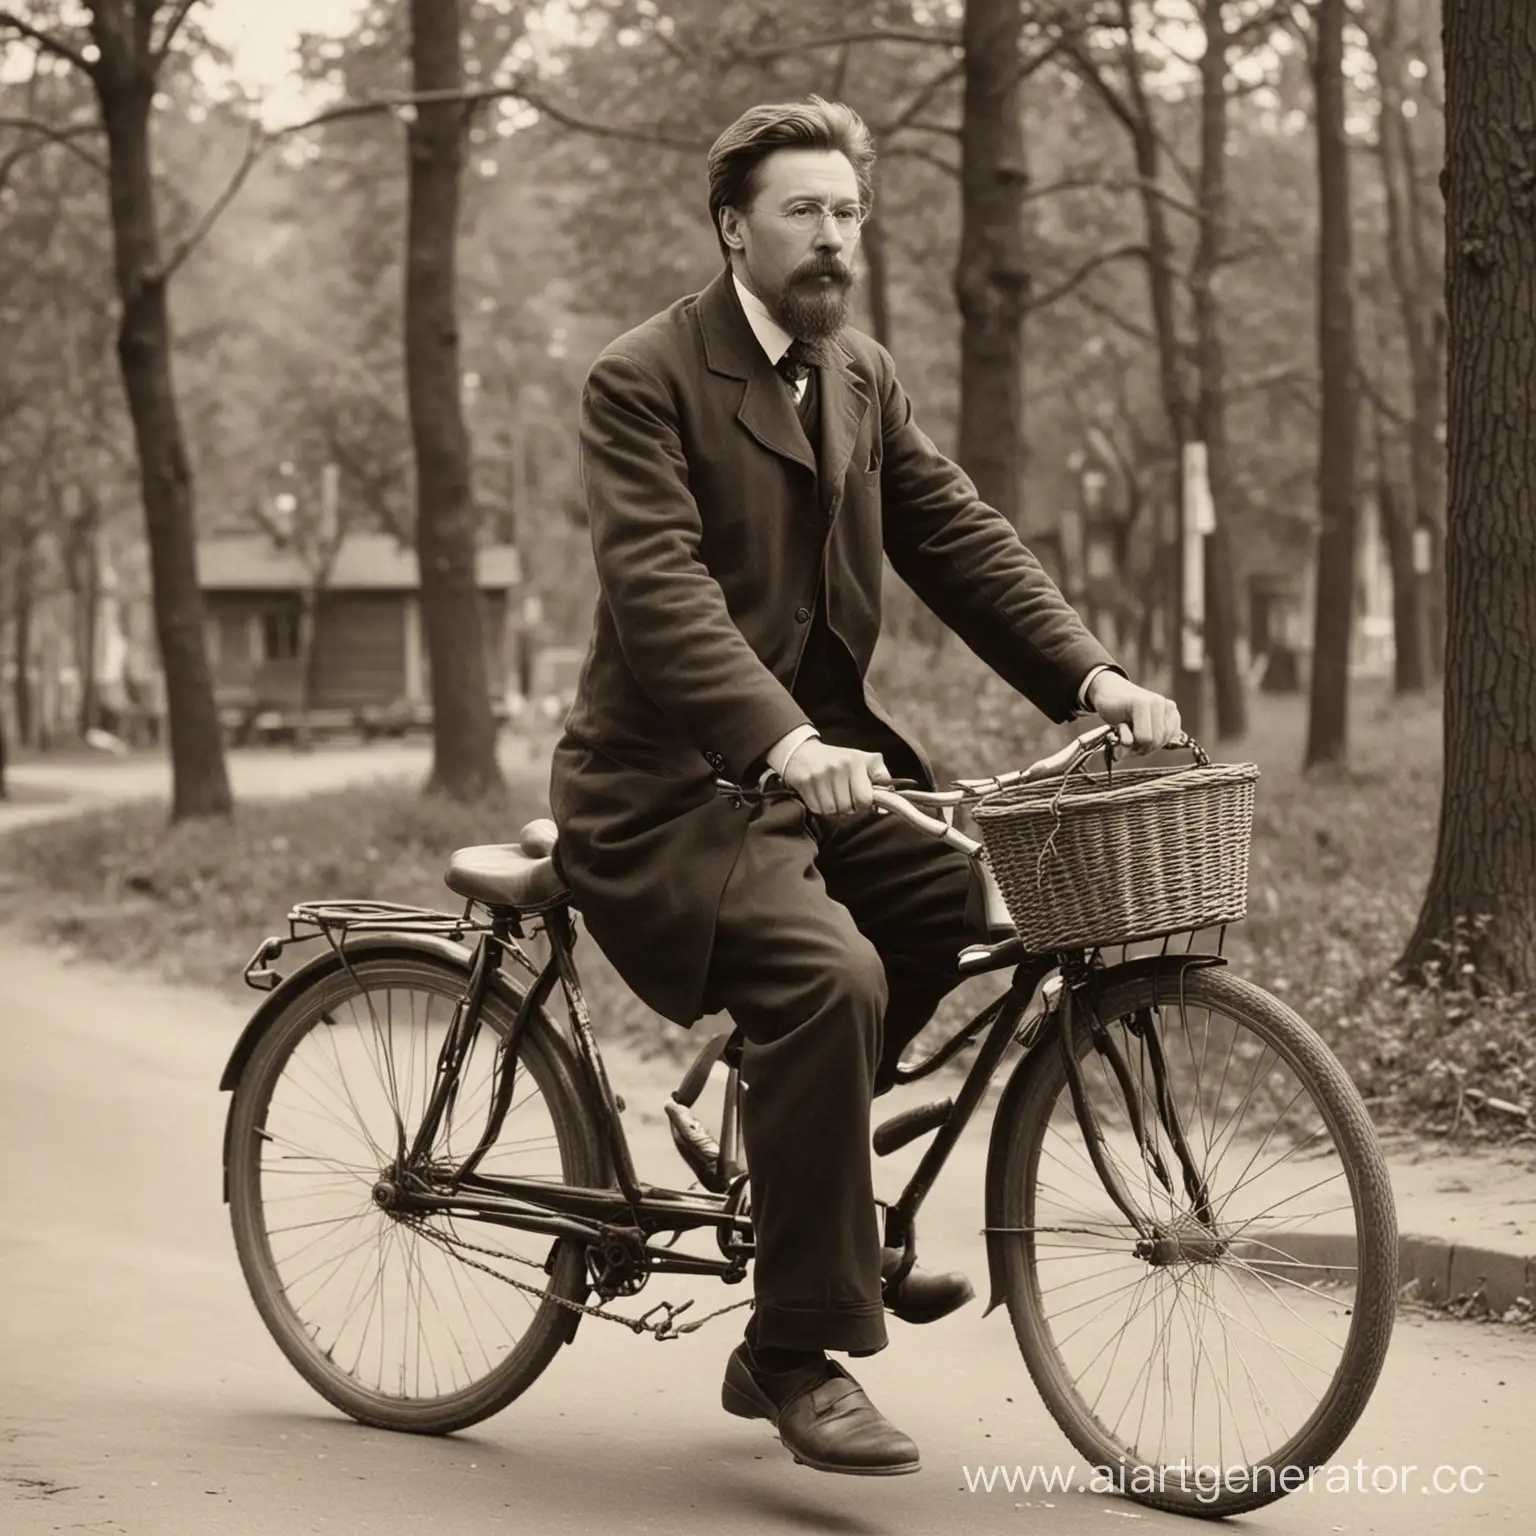 Chekhov-Riding-a-Bicycle-Through-Countryside-Landscape